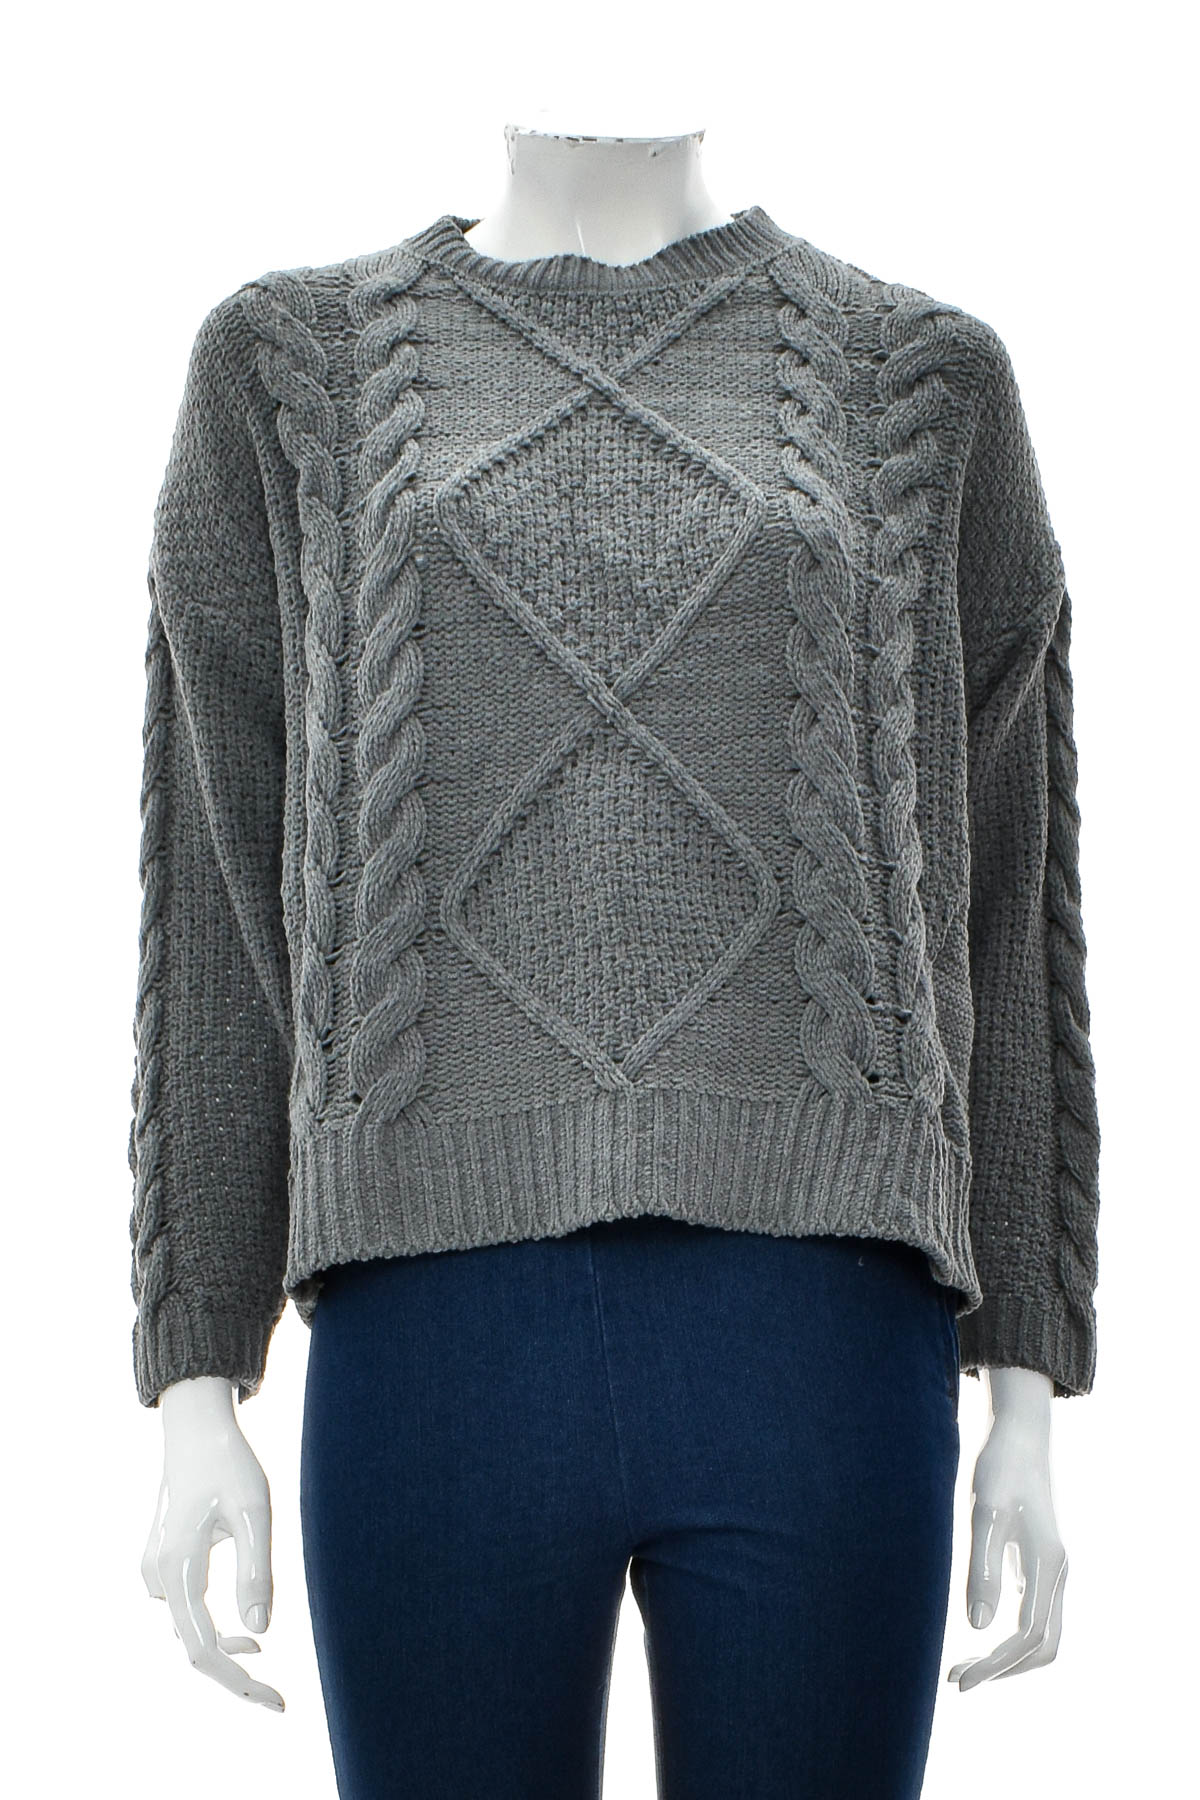 Women's sweater - TIME and TRU - 0